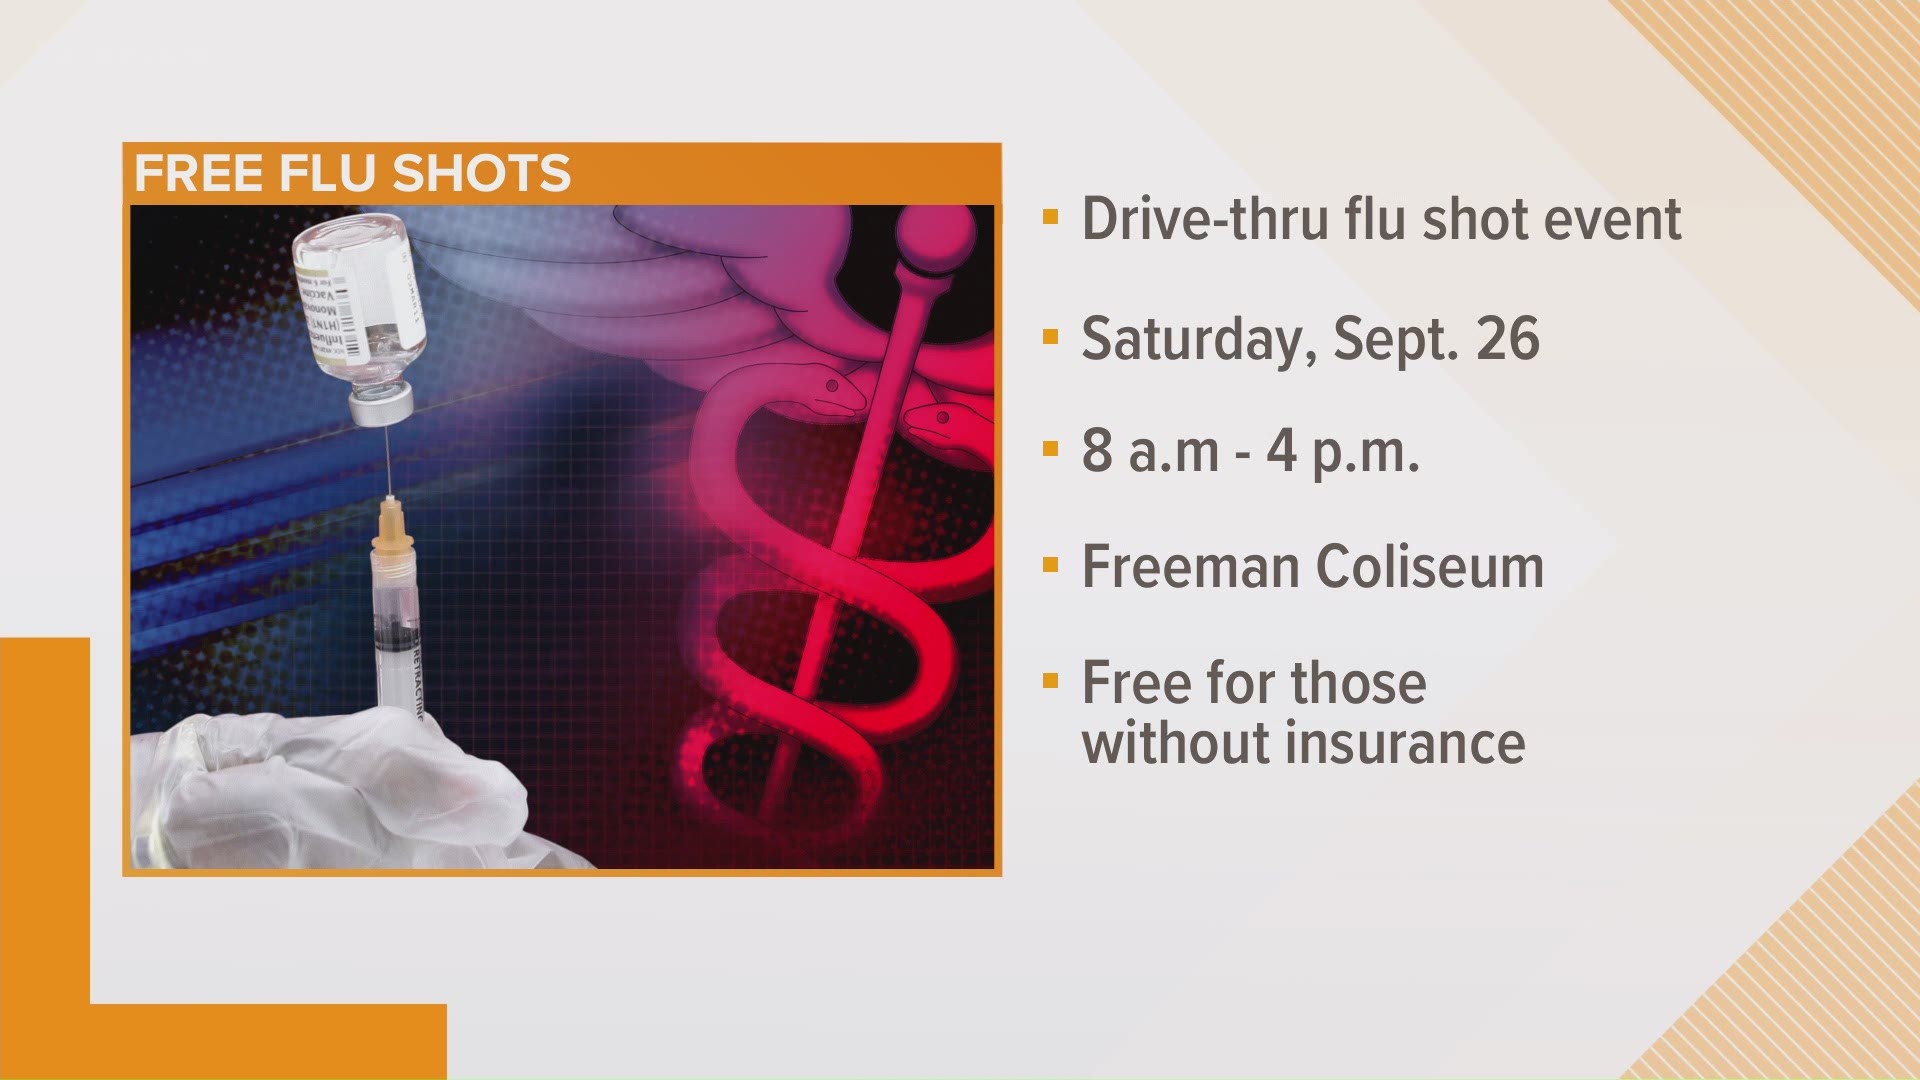 Even if your insurance won't cover it, you can get a flu shot for free this weekend at a drive-thru event at the Freeman Coliseum.